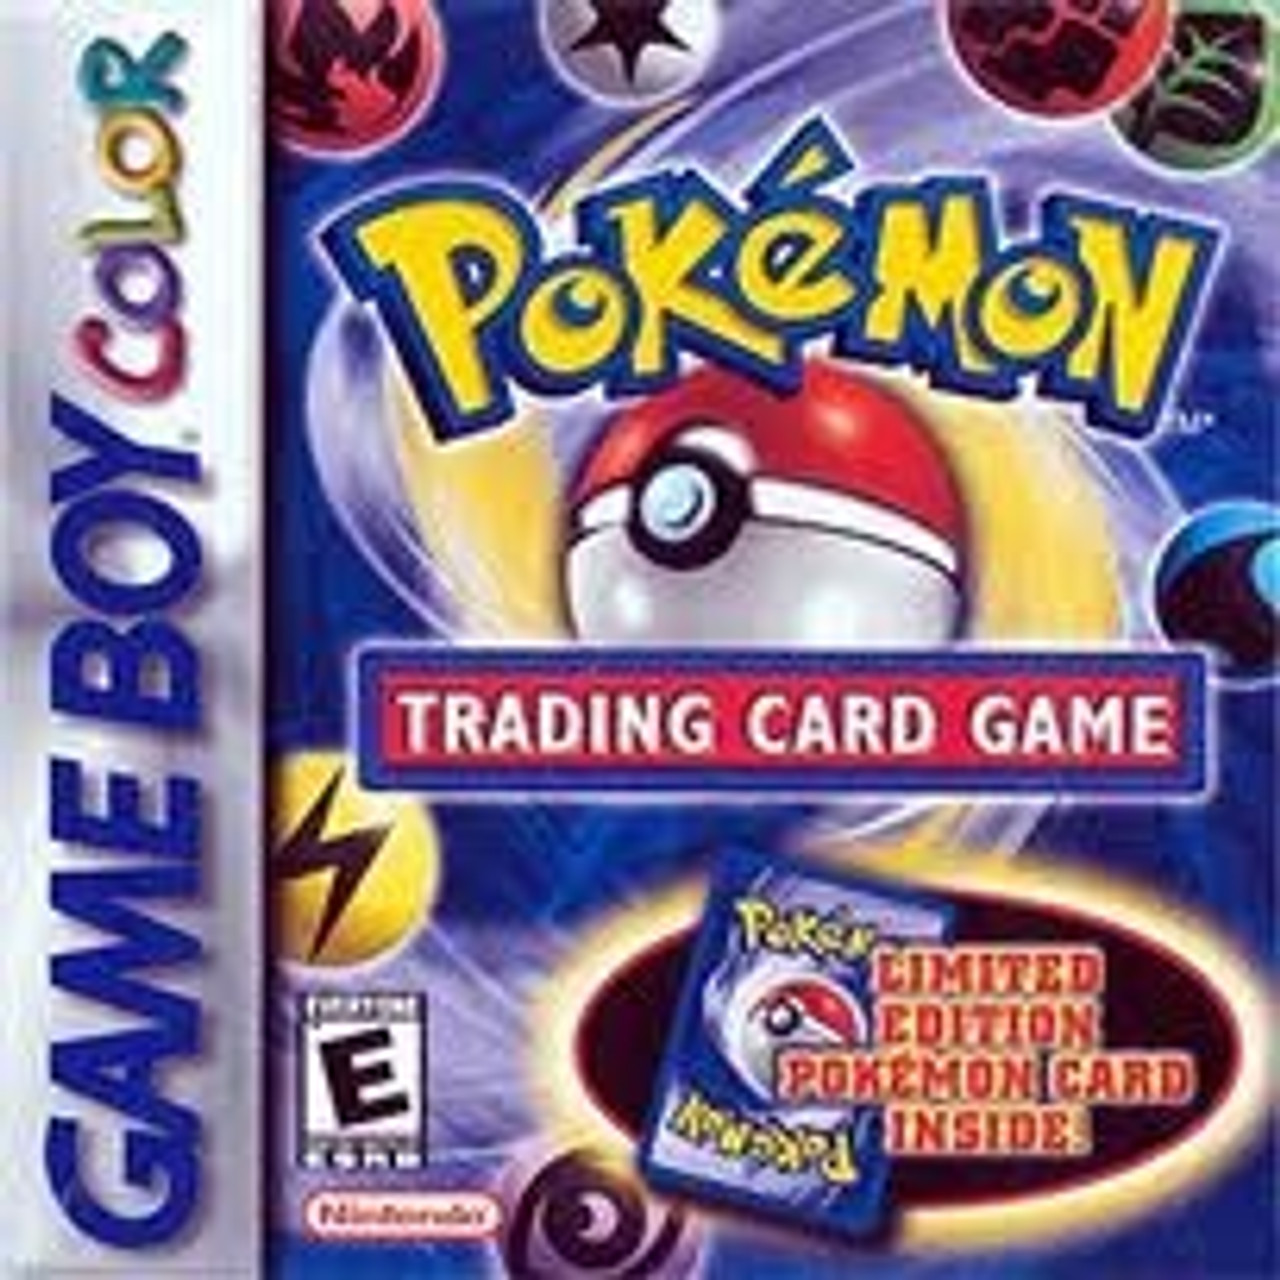 Pokemon Red Nintendo GameBoy Game For Sale